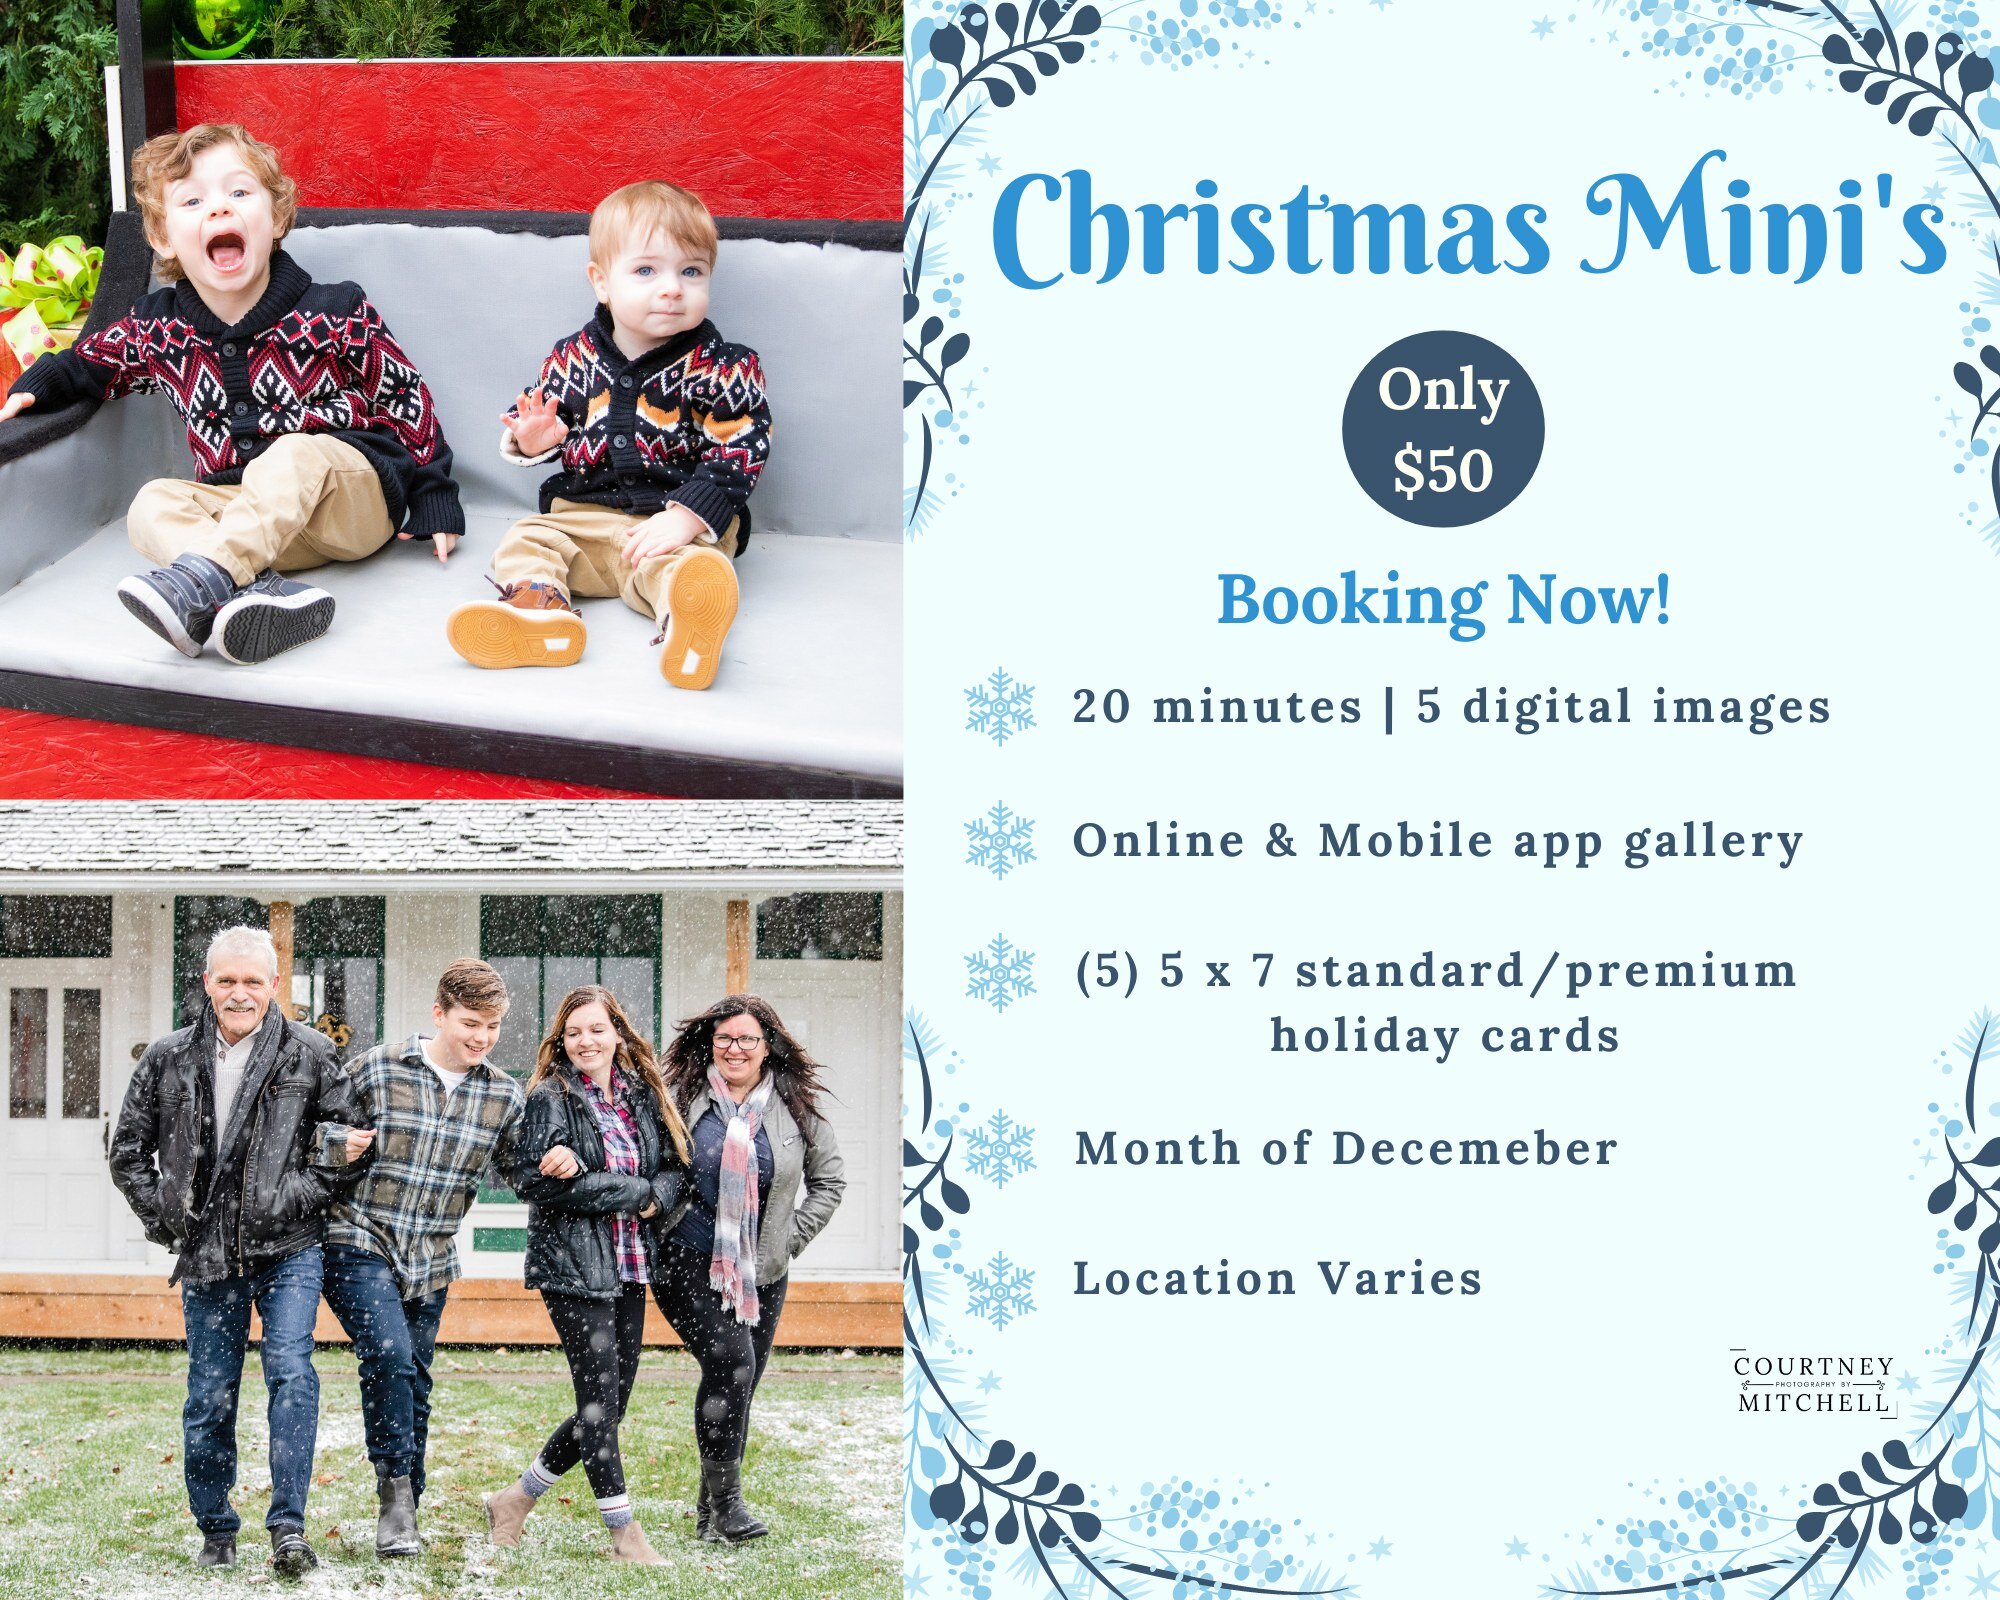 Now Booking!
Don't miss out on the chance to create the most wonderful memories of the year!! Showcase the forever love with family and friends with an unforgettable photo session to keep the memories alive. Each mini memory session includes 5 custom